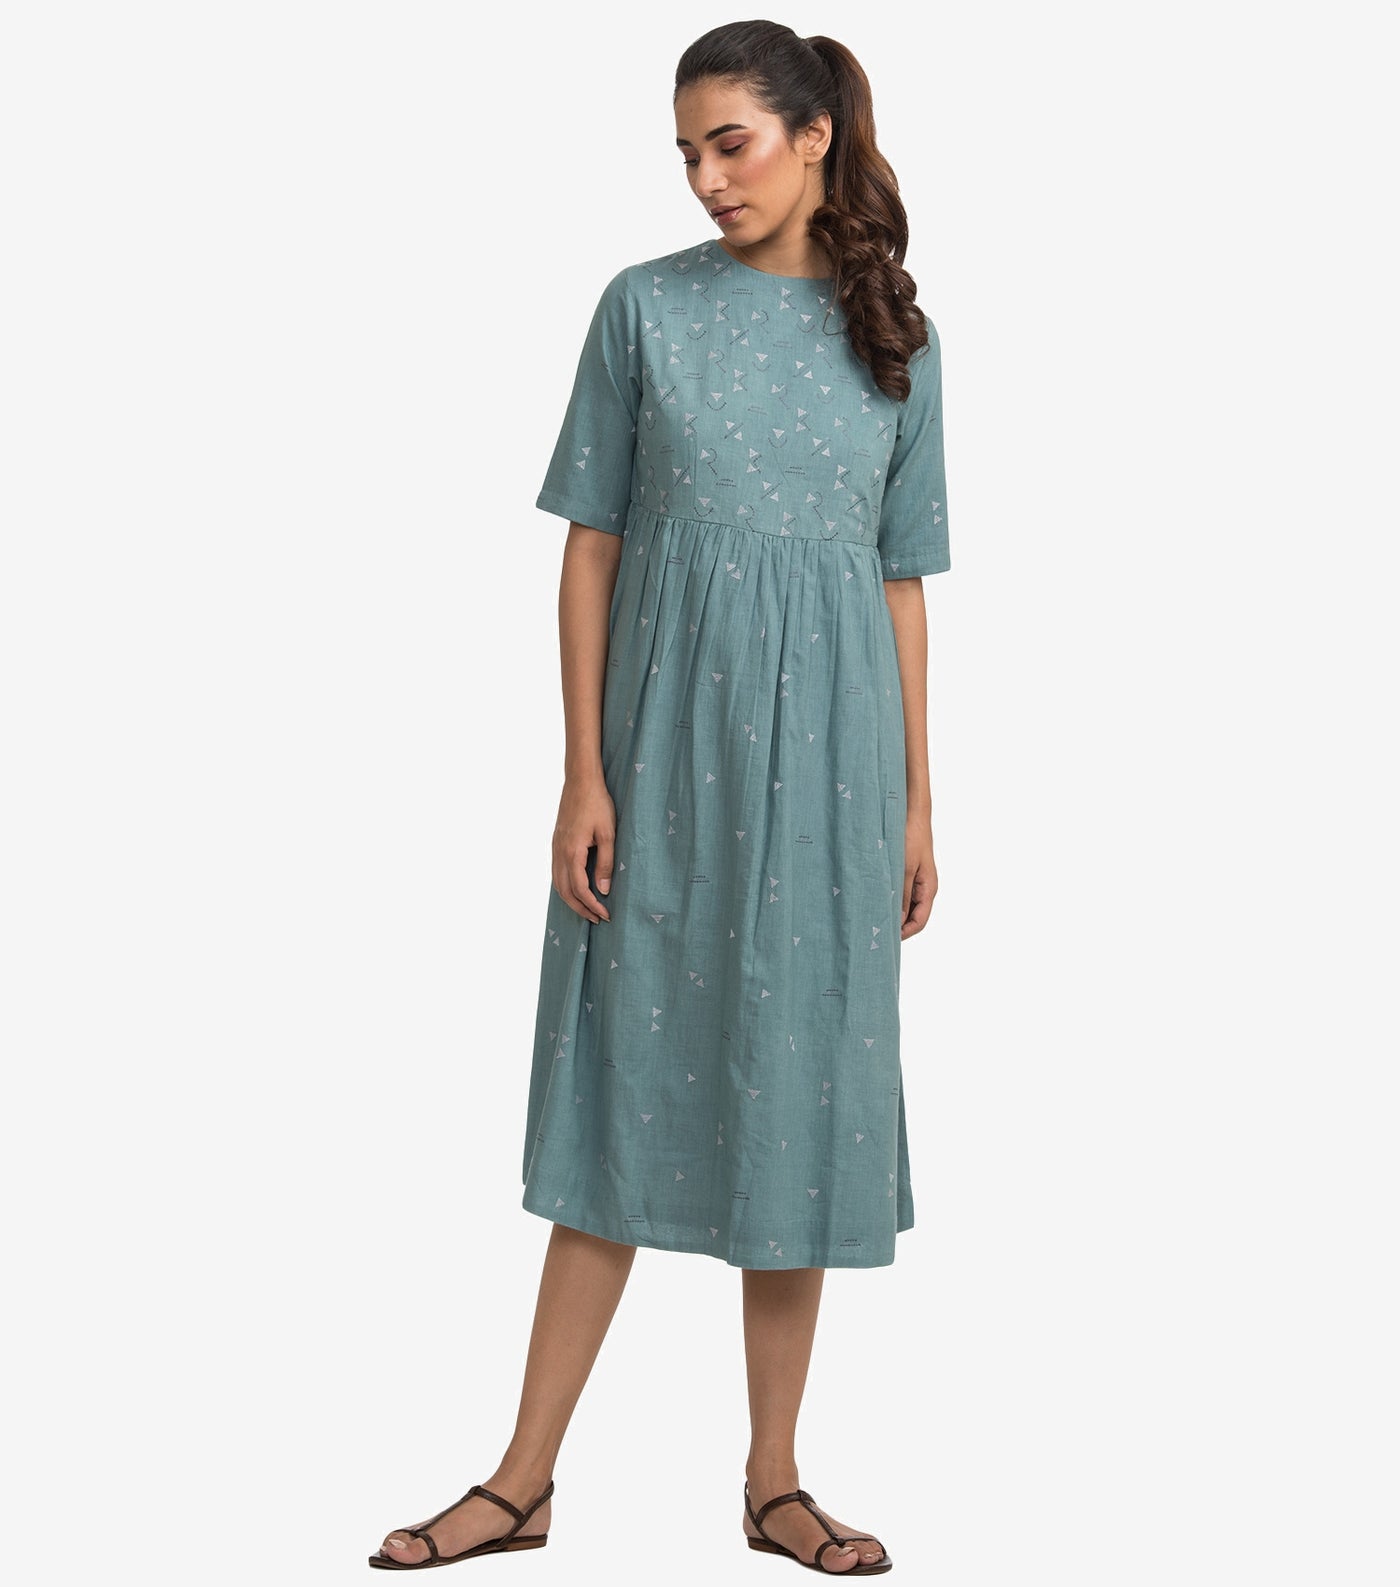 Blue cotton embroidered dress